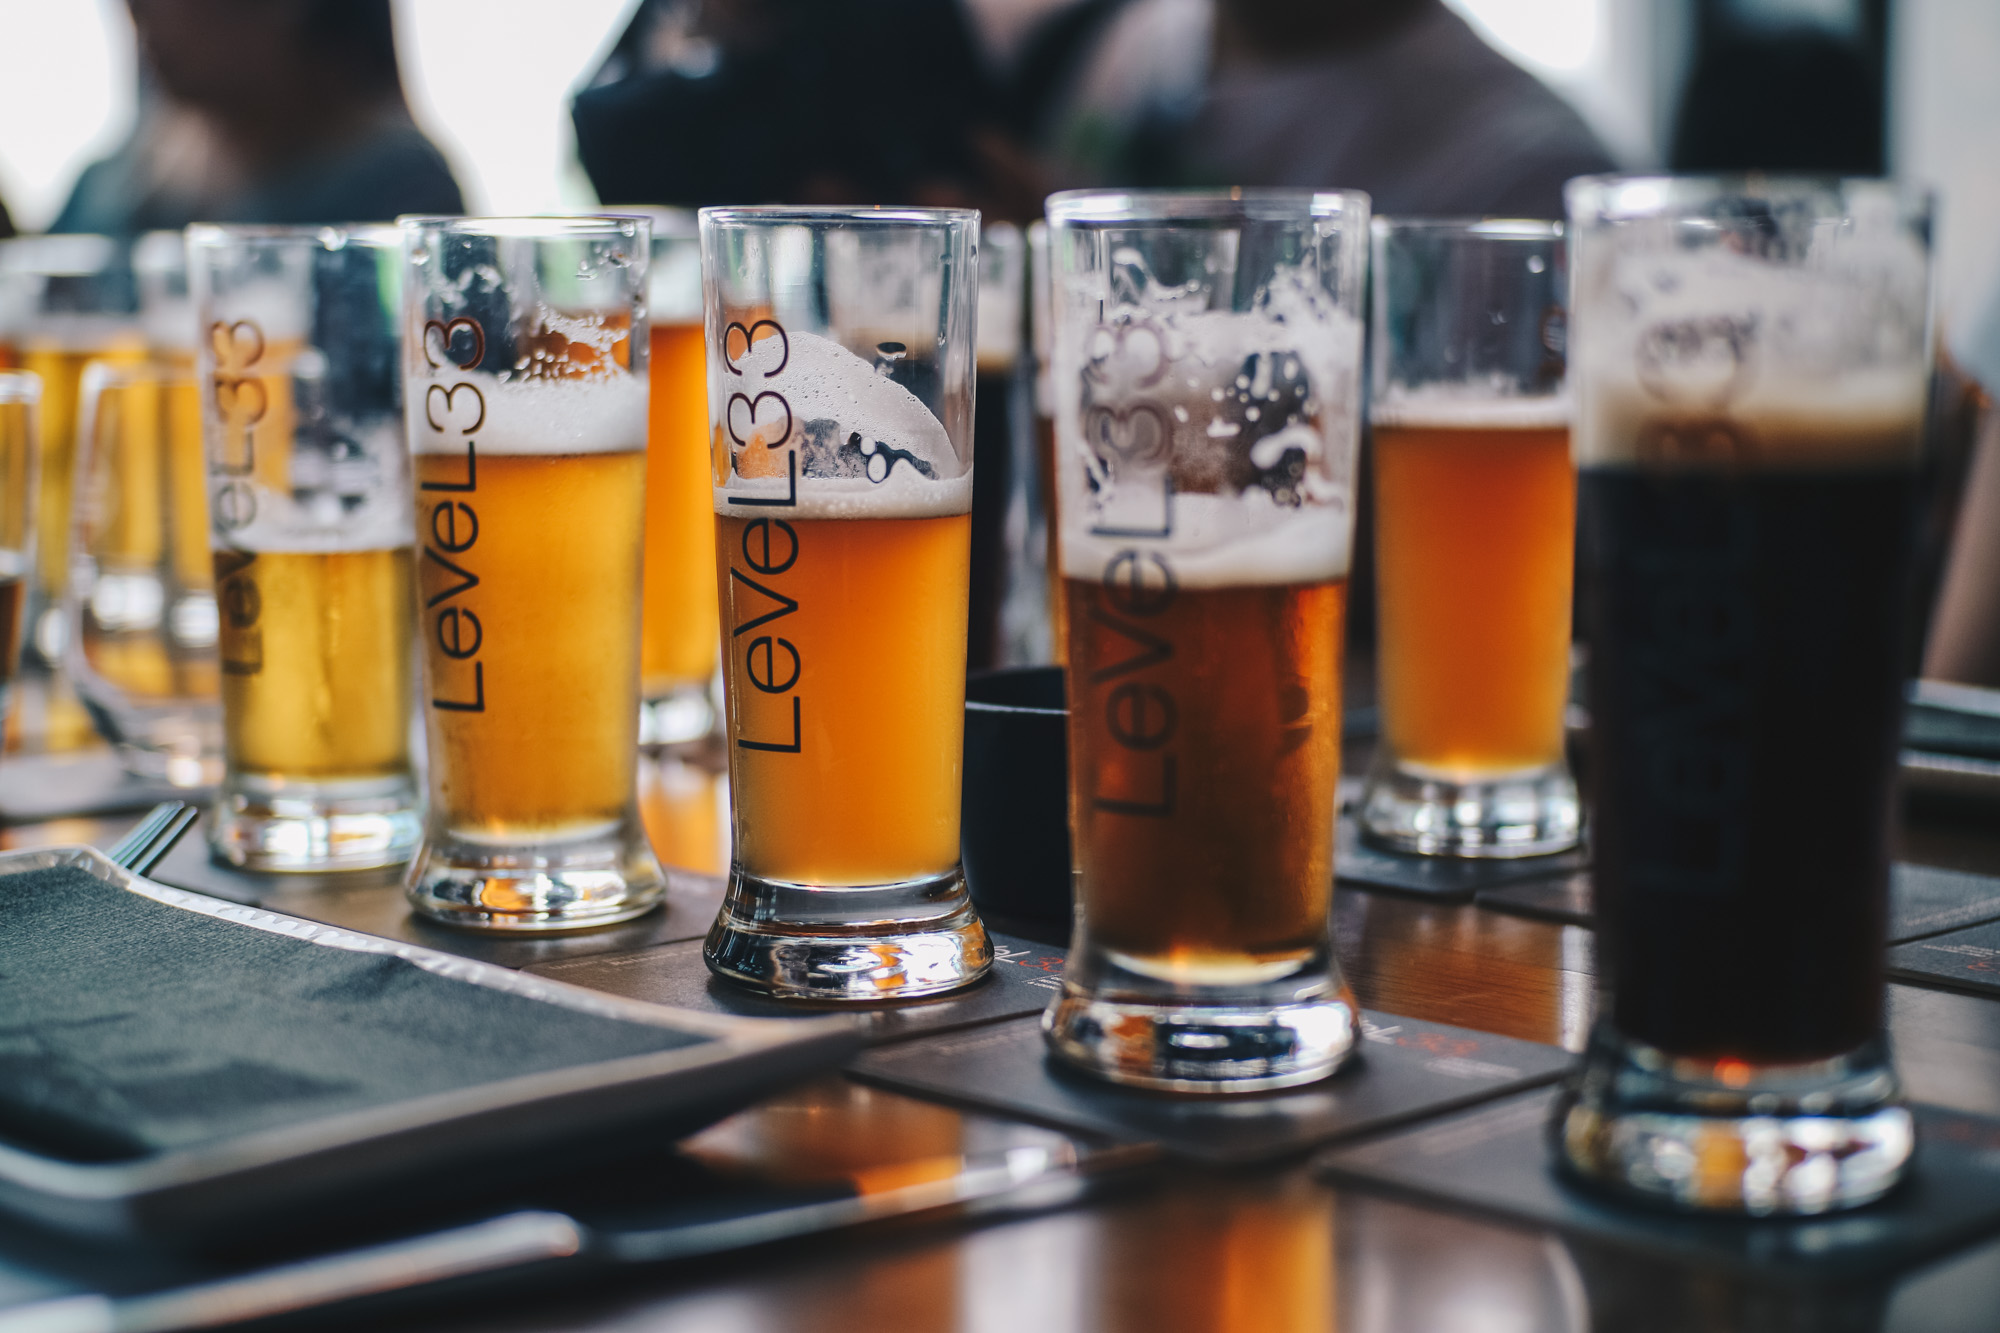 Experience The Craft Beer Scene With LeVeL33’s Brewery Tour